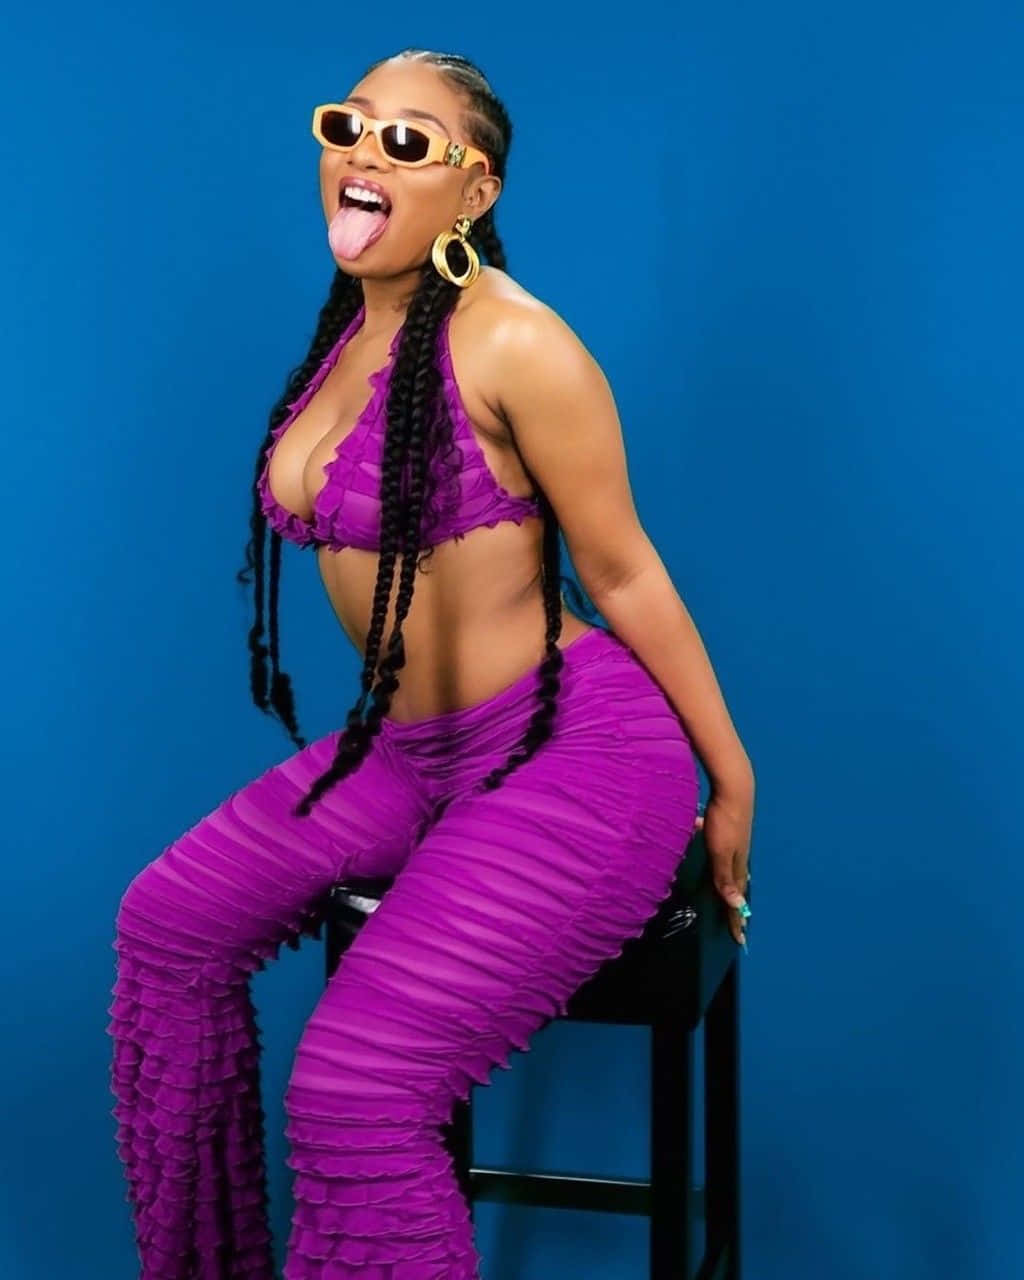 Captivating Megan Thee Stallion in a Stylish Outfit